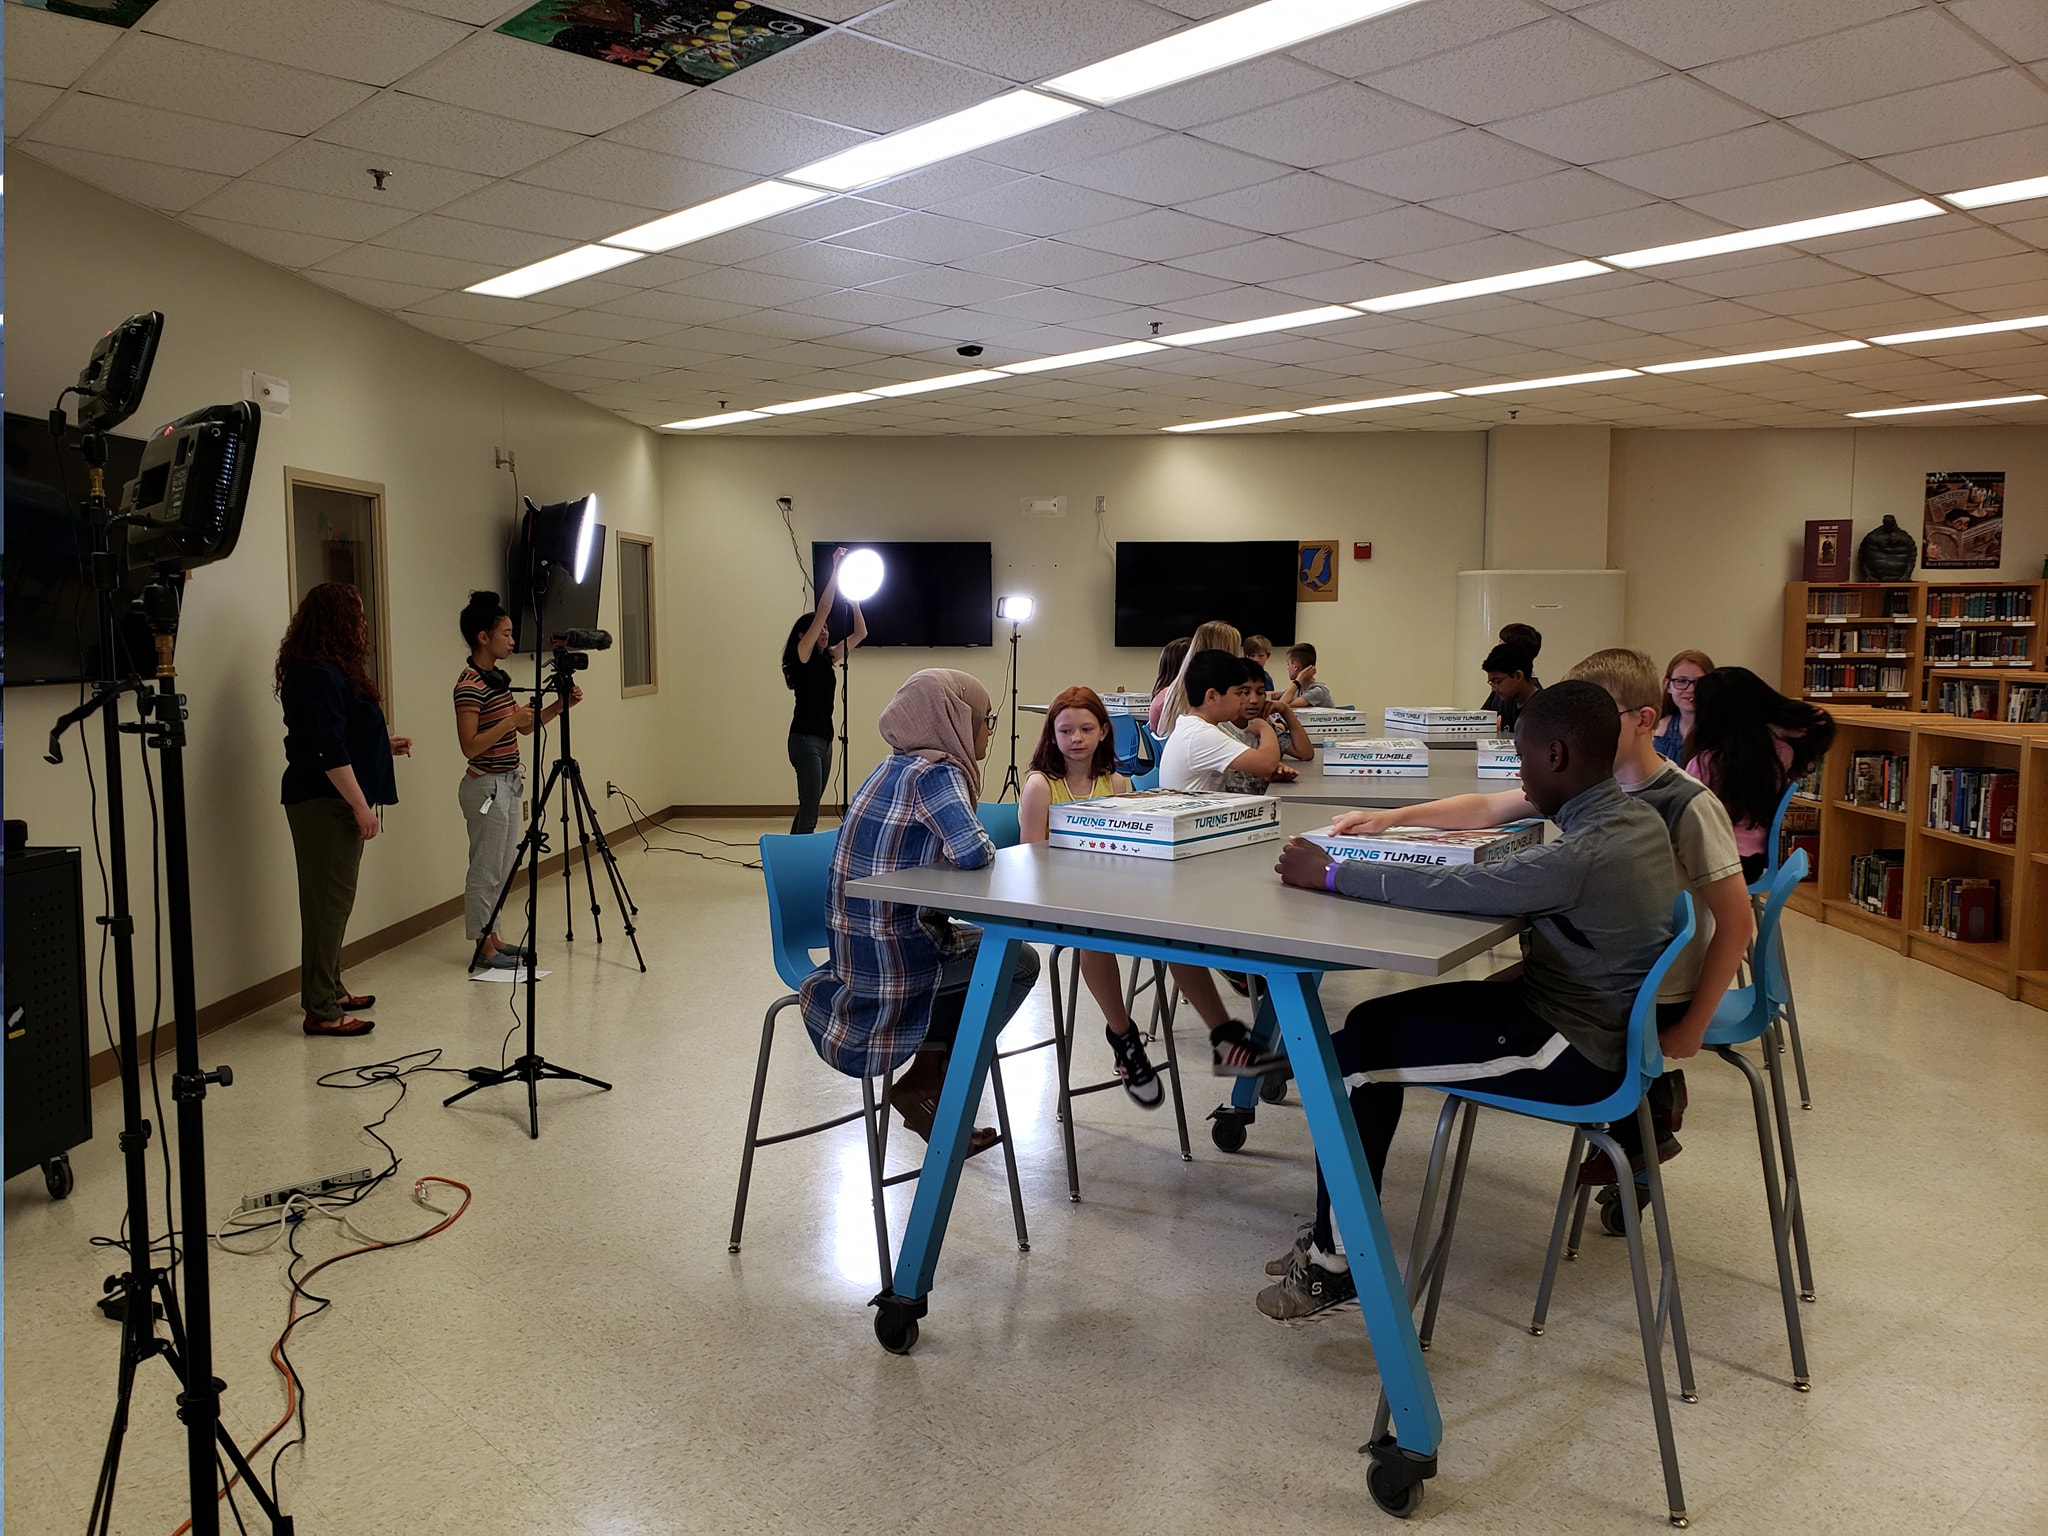 Behind the scenes of an educational video shoot